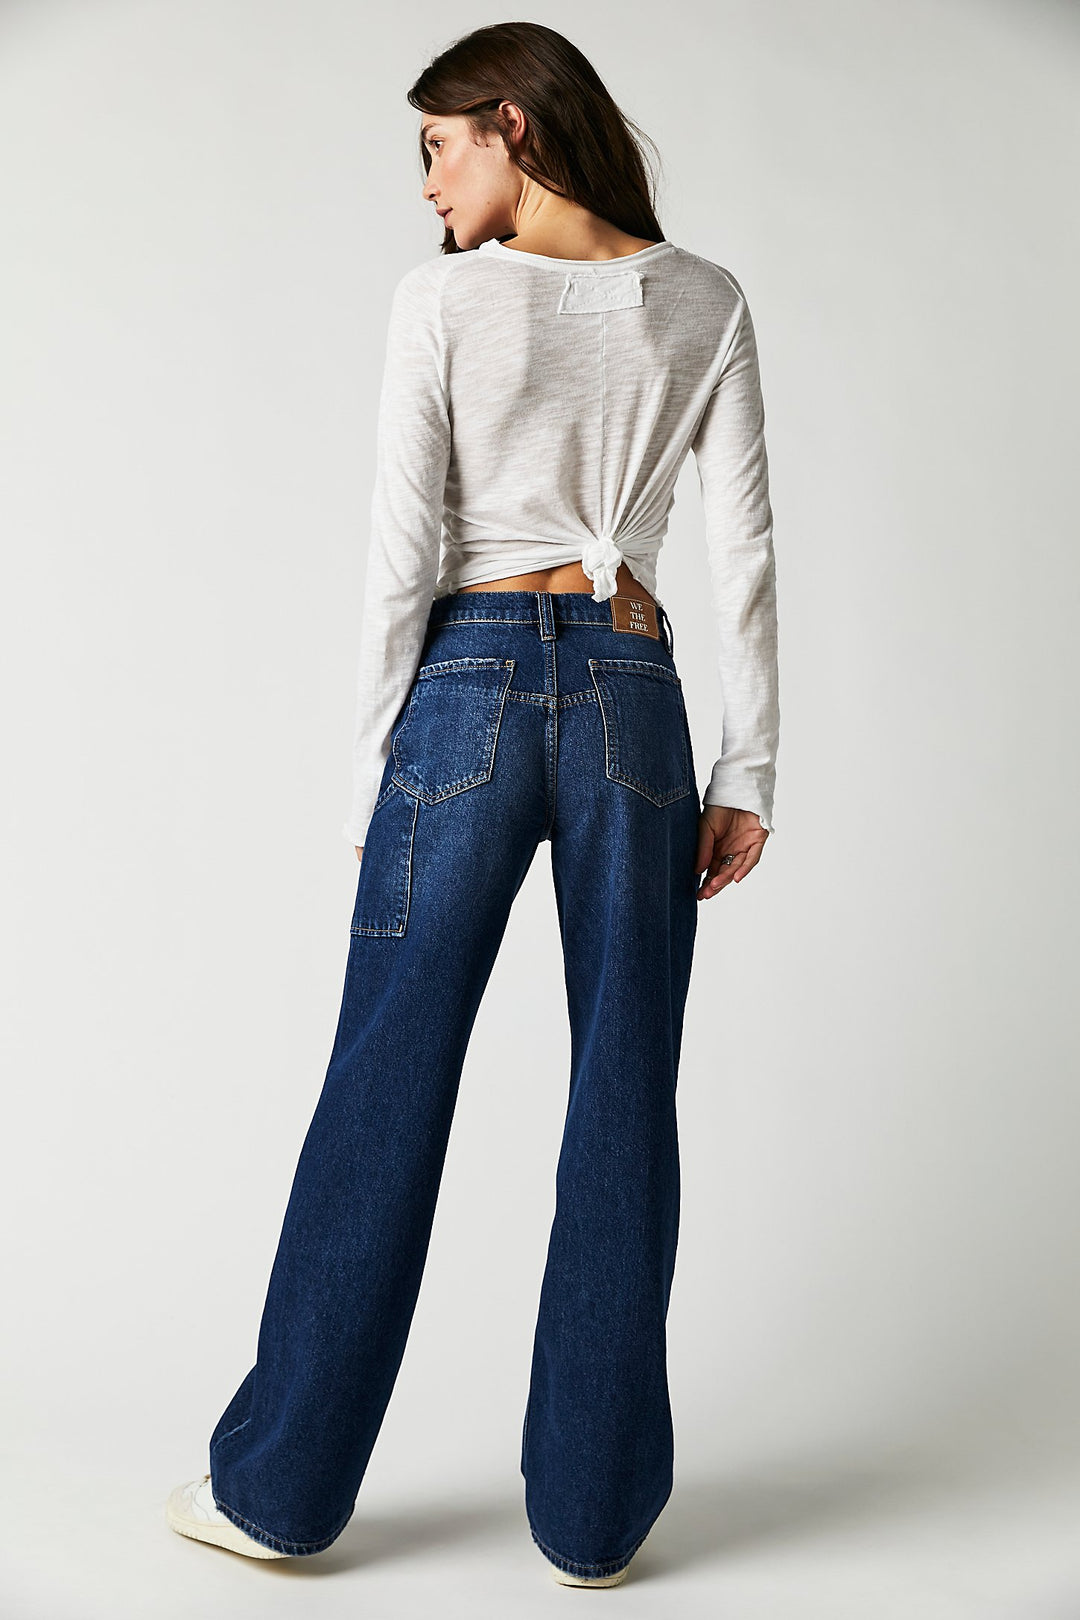 Free People Tinsley Baggy High Rise